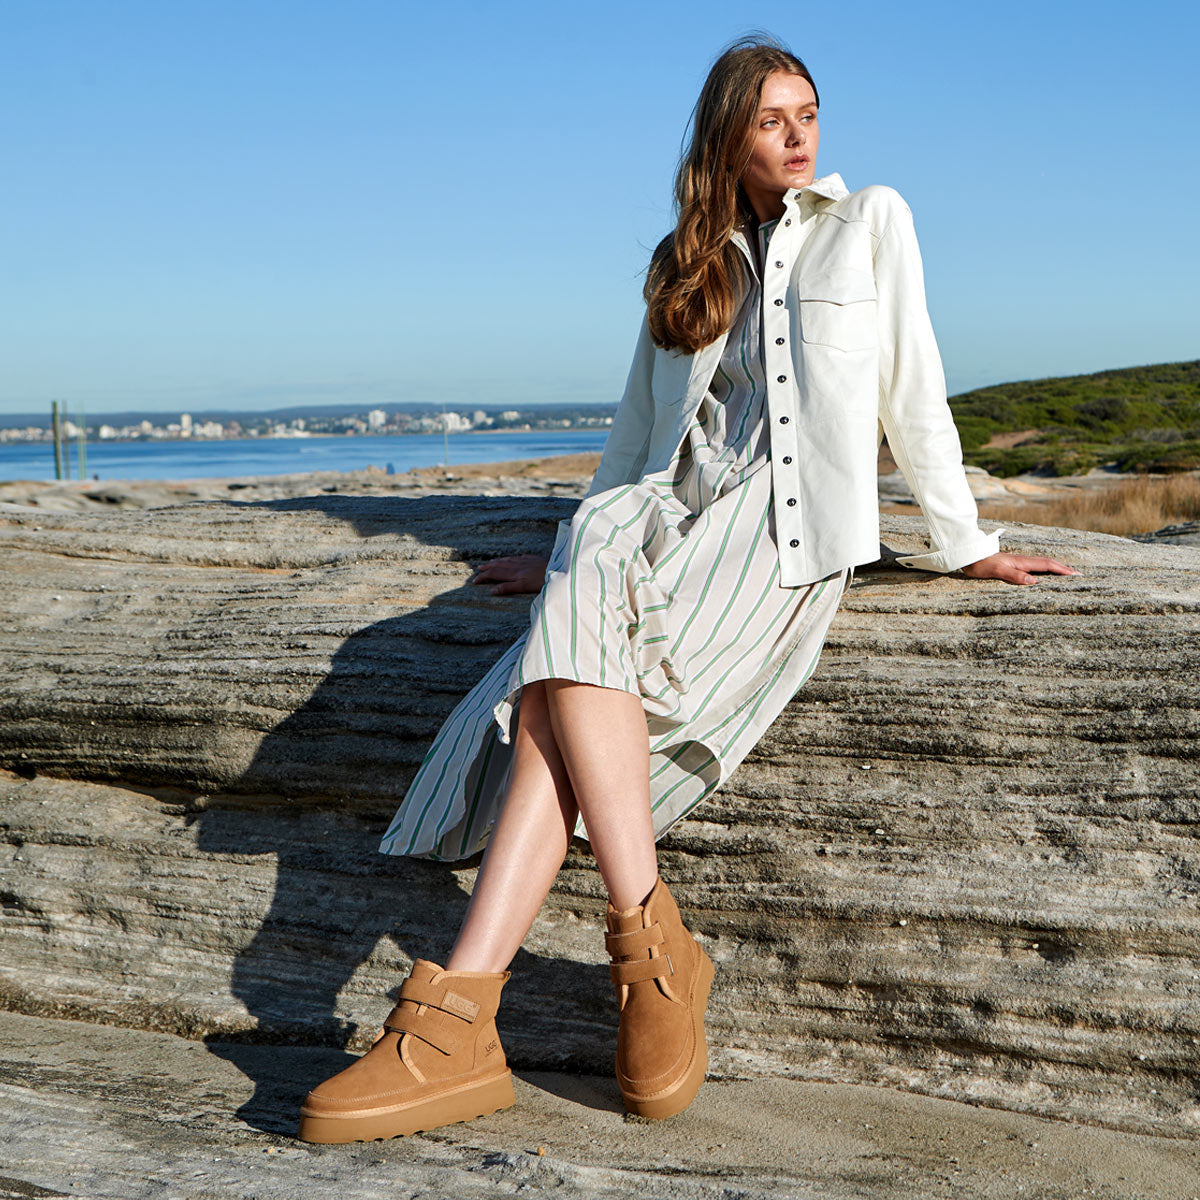 Choosing The Perfect Women's Footwear for Australia's Varied Climate